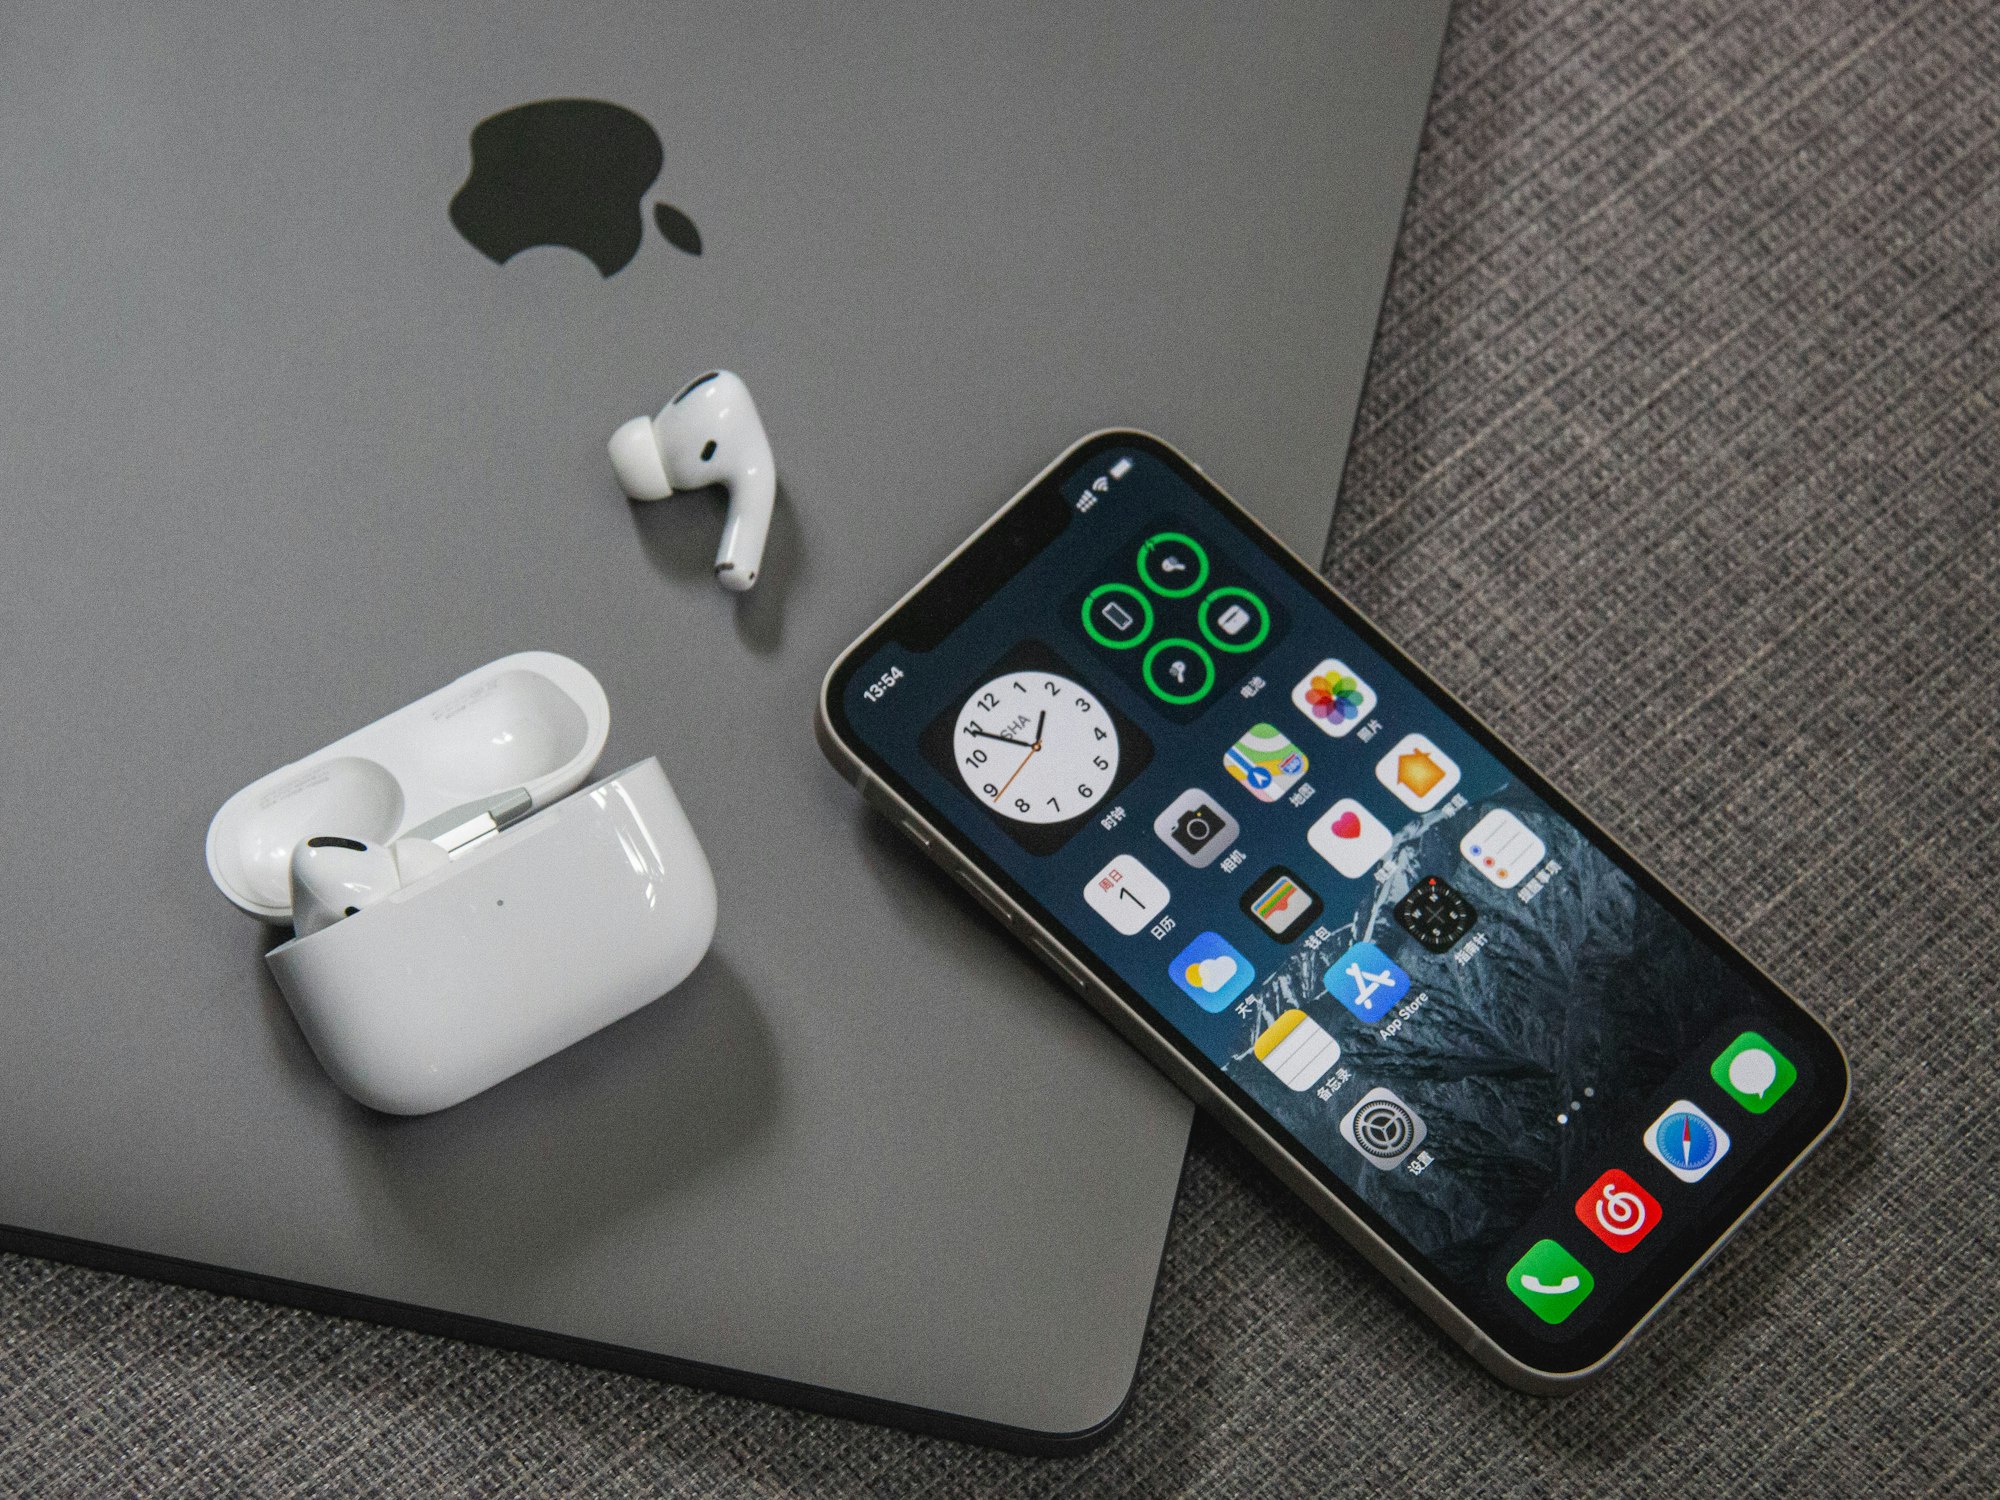 How to Connect Airpods to Your iPhone or iPad